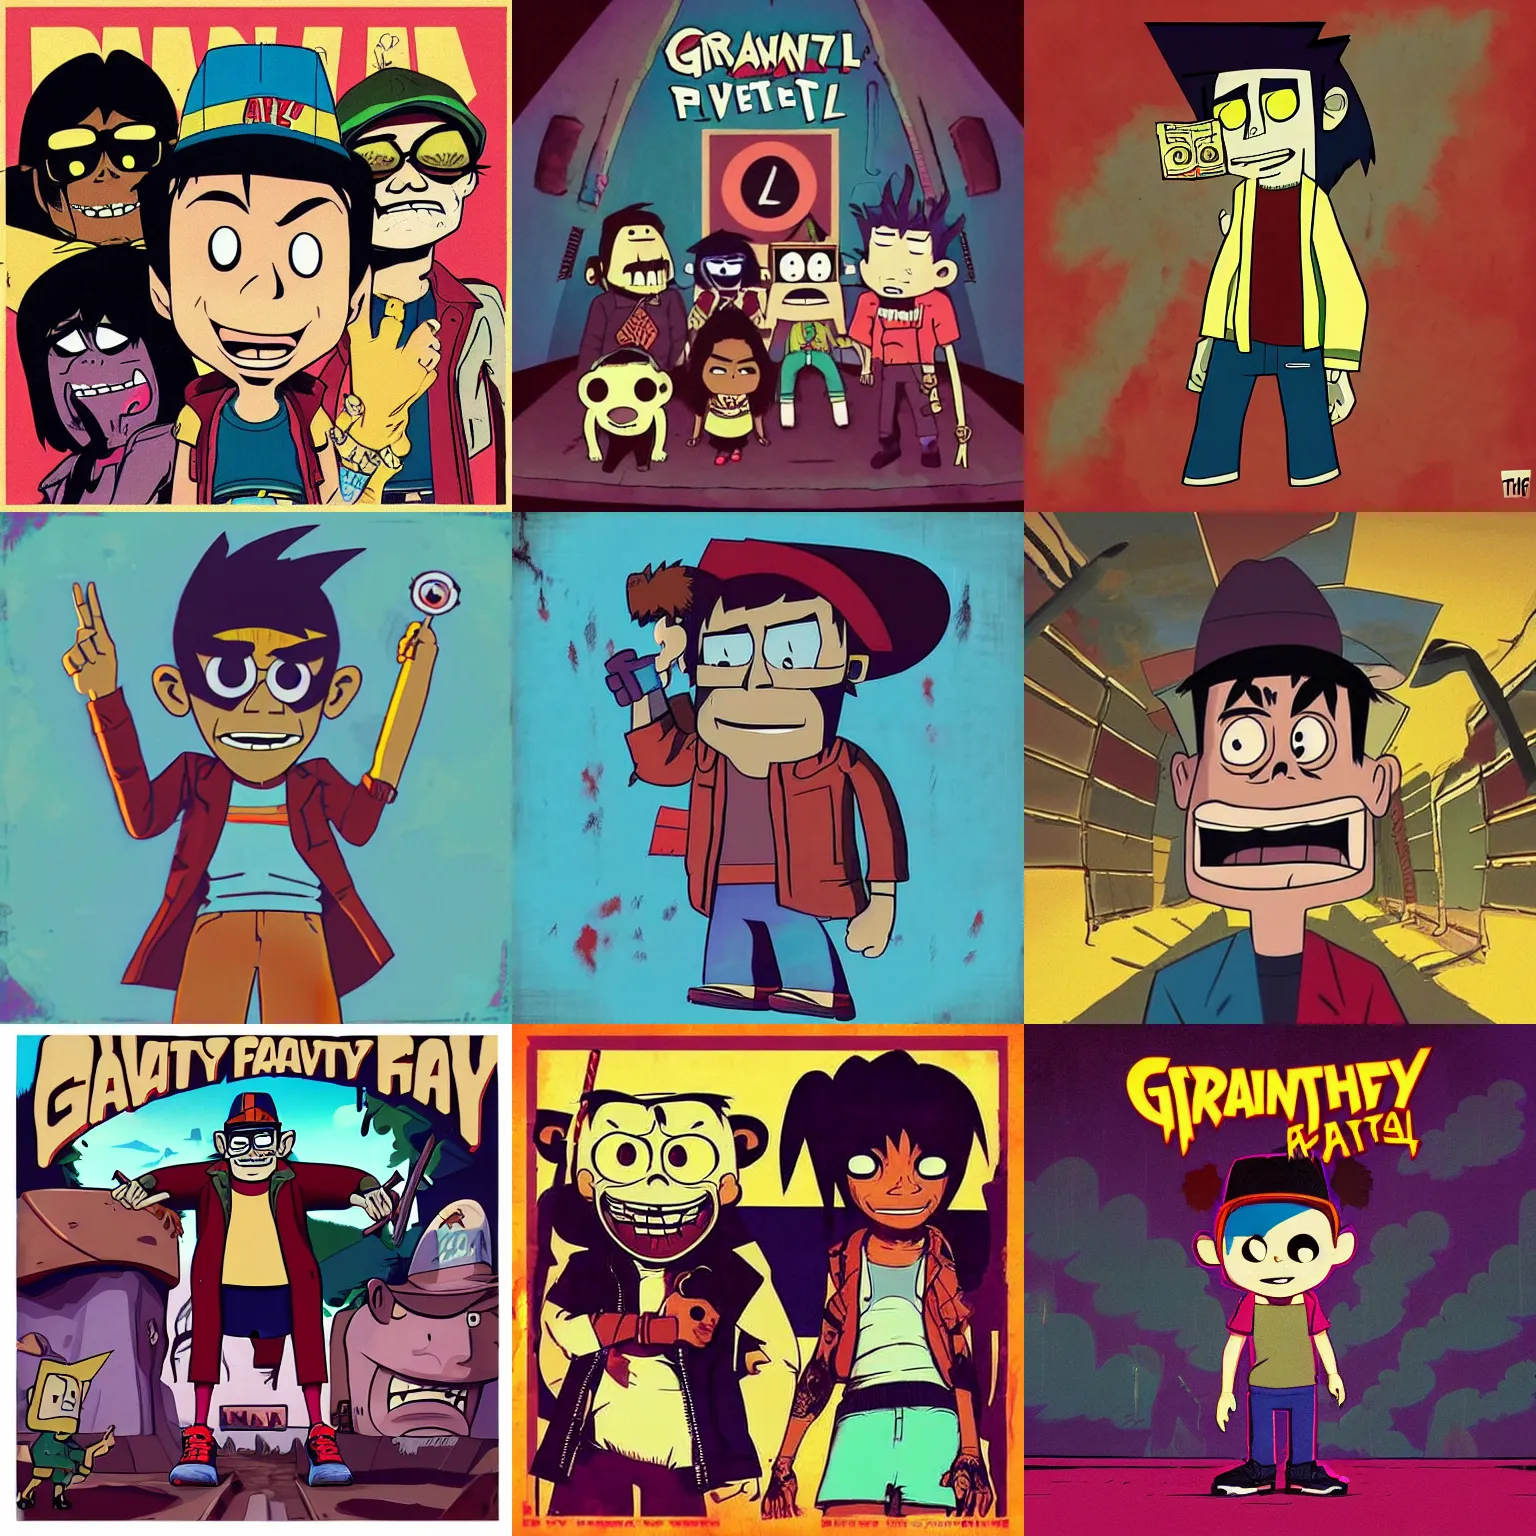 Prompt: The character from Gravity falls in the Album Cover by the Gorillaz